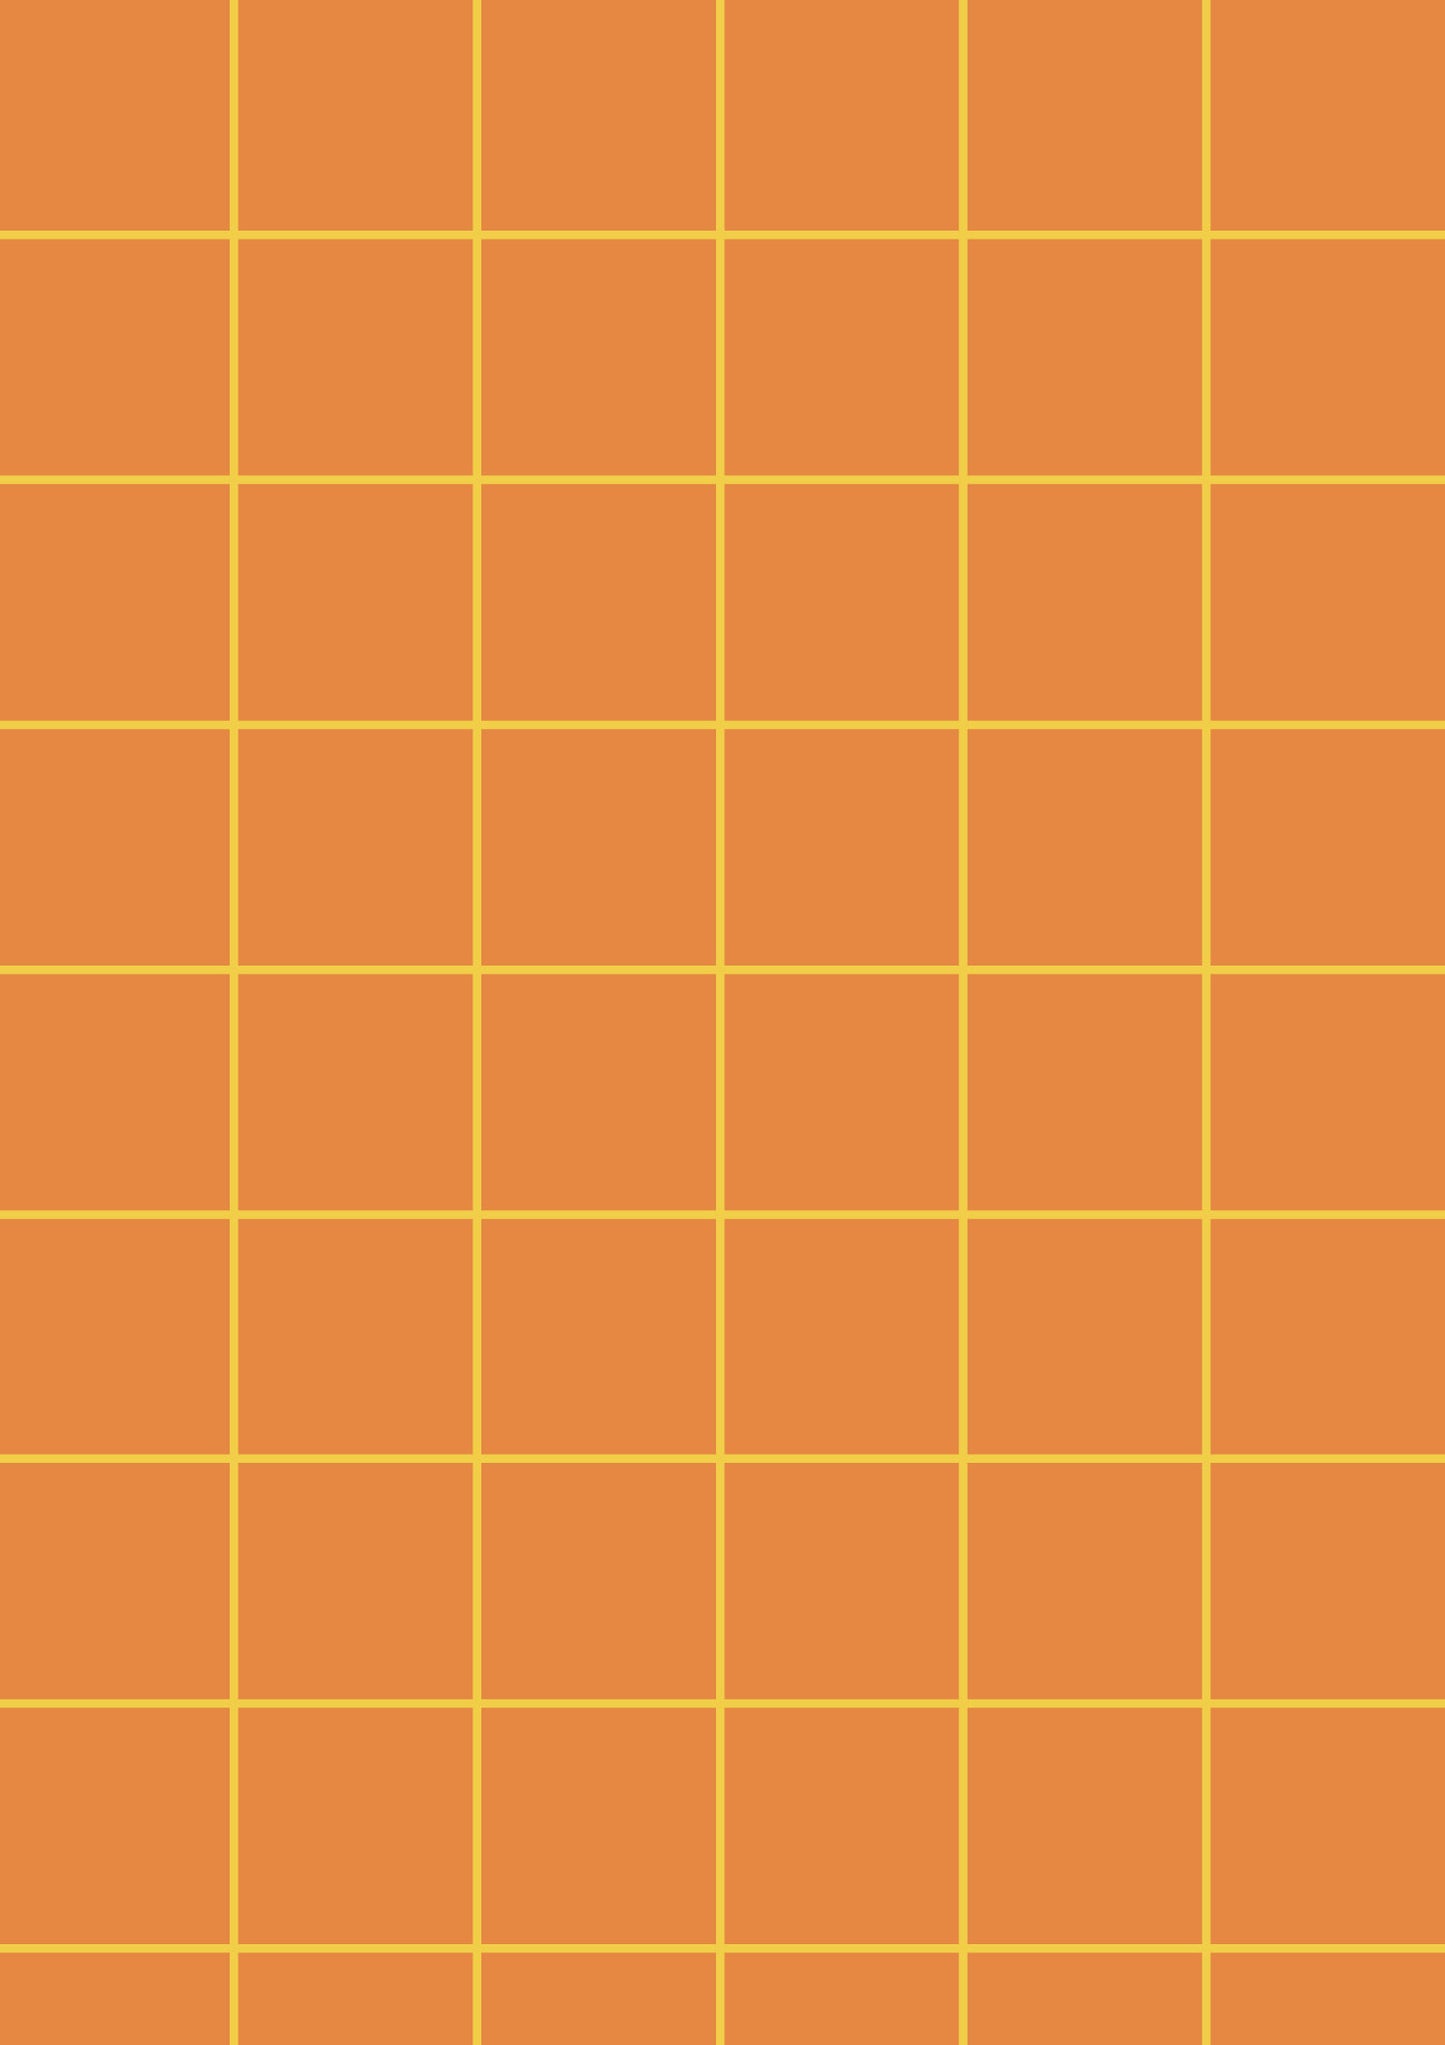 Orange A1 Photography Backdrop with Yellow Grid